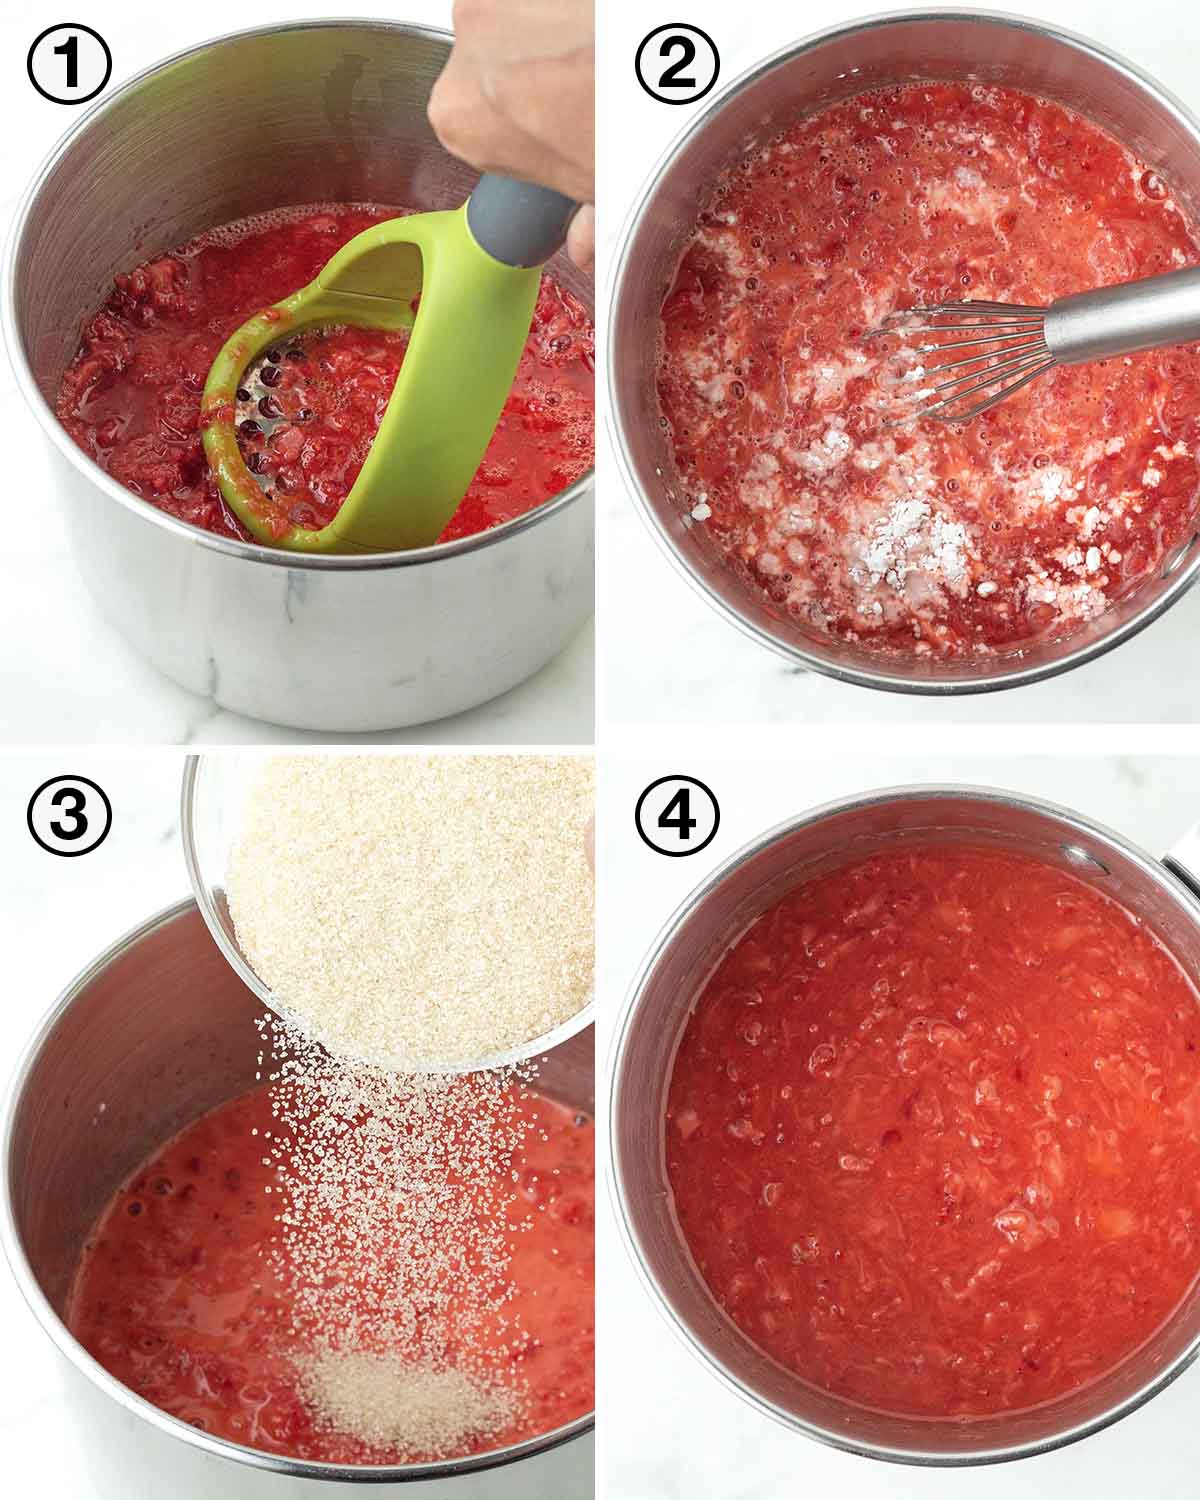 A collage of four images showing the first sequence of steps needed to make a vegan strawberry pie.